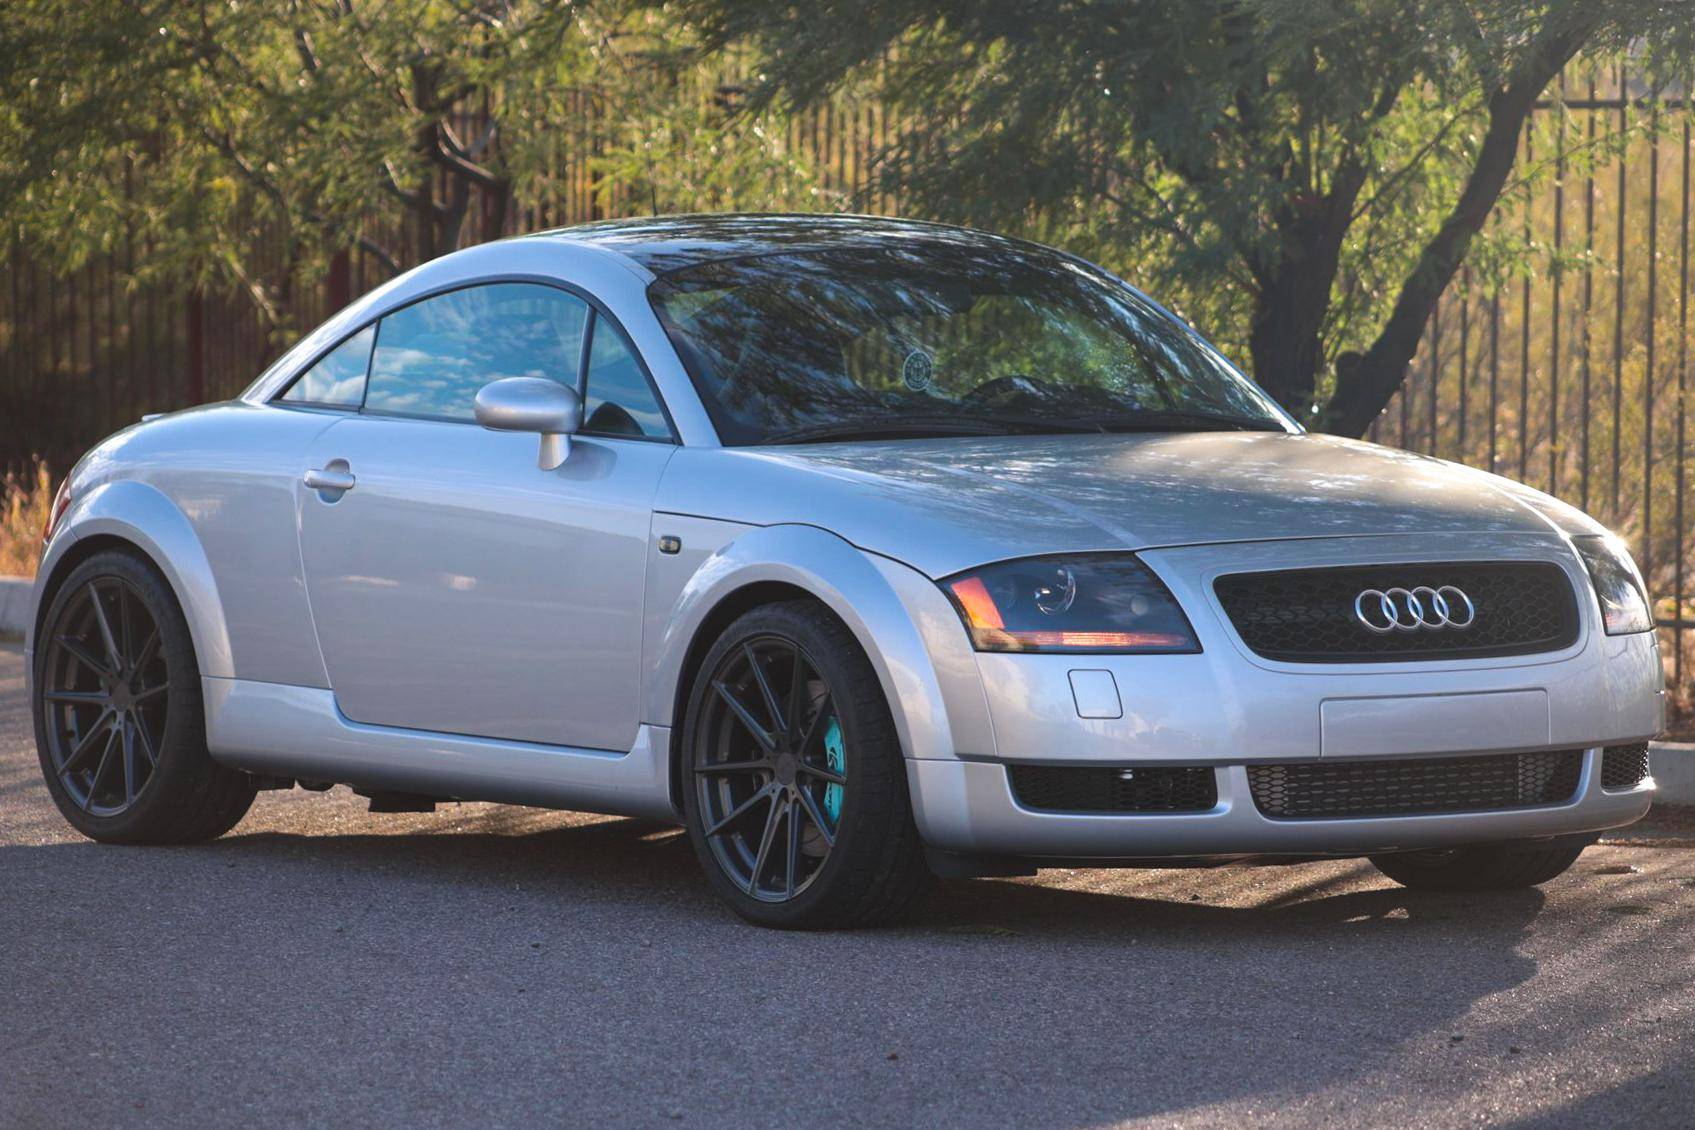 Audi - TT I Type 8N (Coupé) Wheels and Tyre Packages